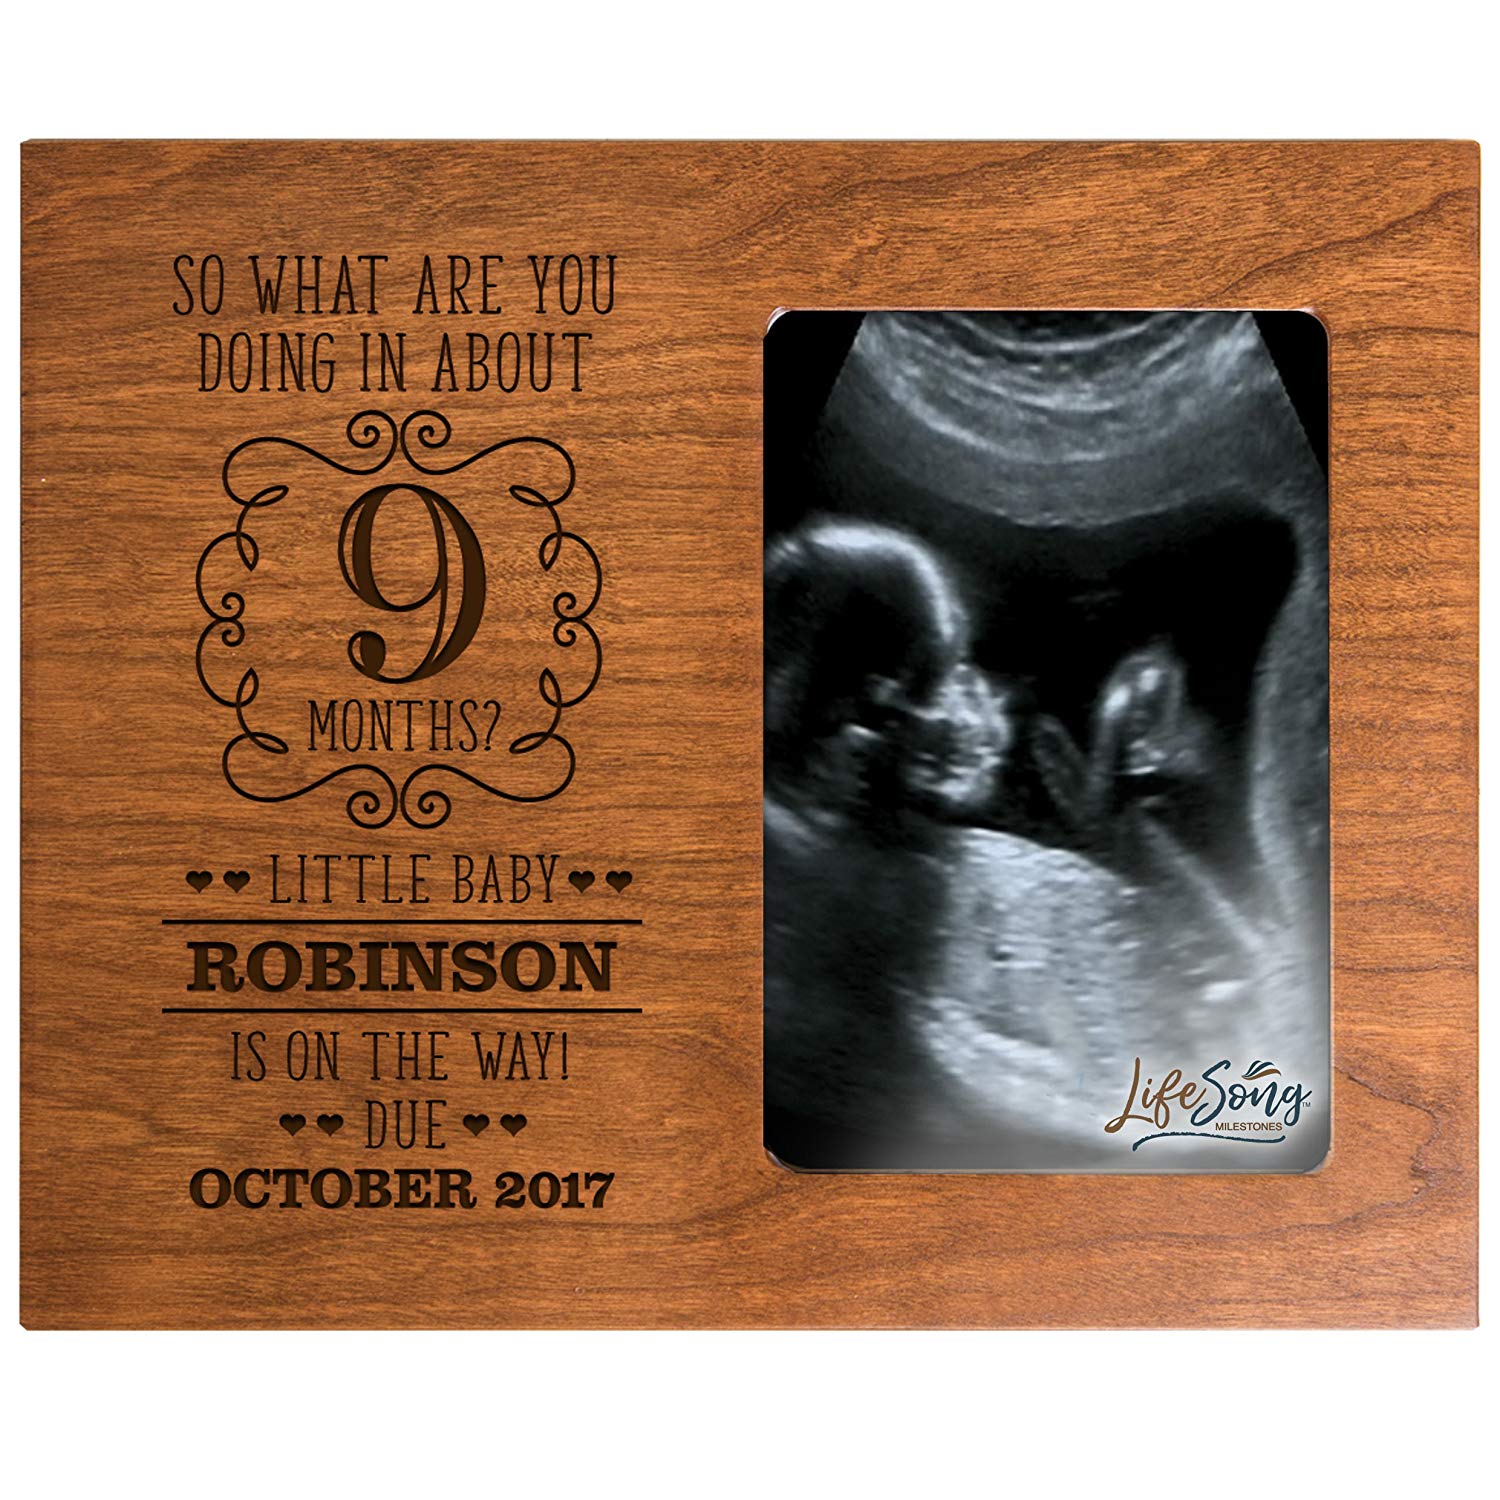 Personalized New Baby Sonogram Photo Frames - About 9 Months? - LifeSong Milestones